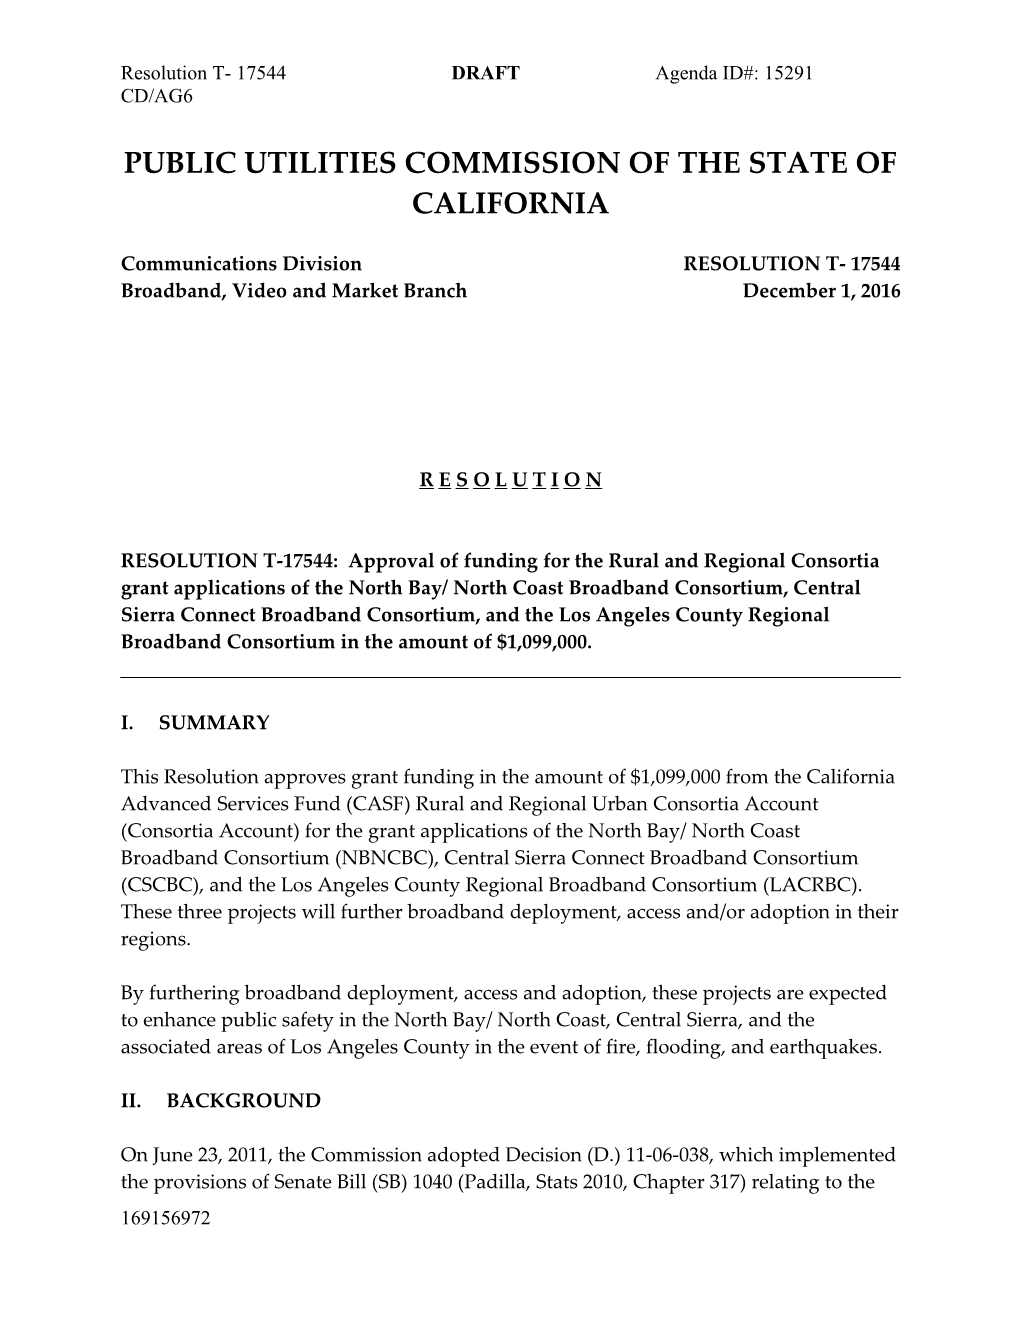 Public Utilities Commission of the State of California s11